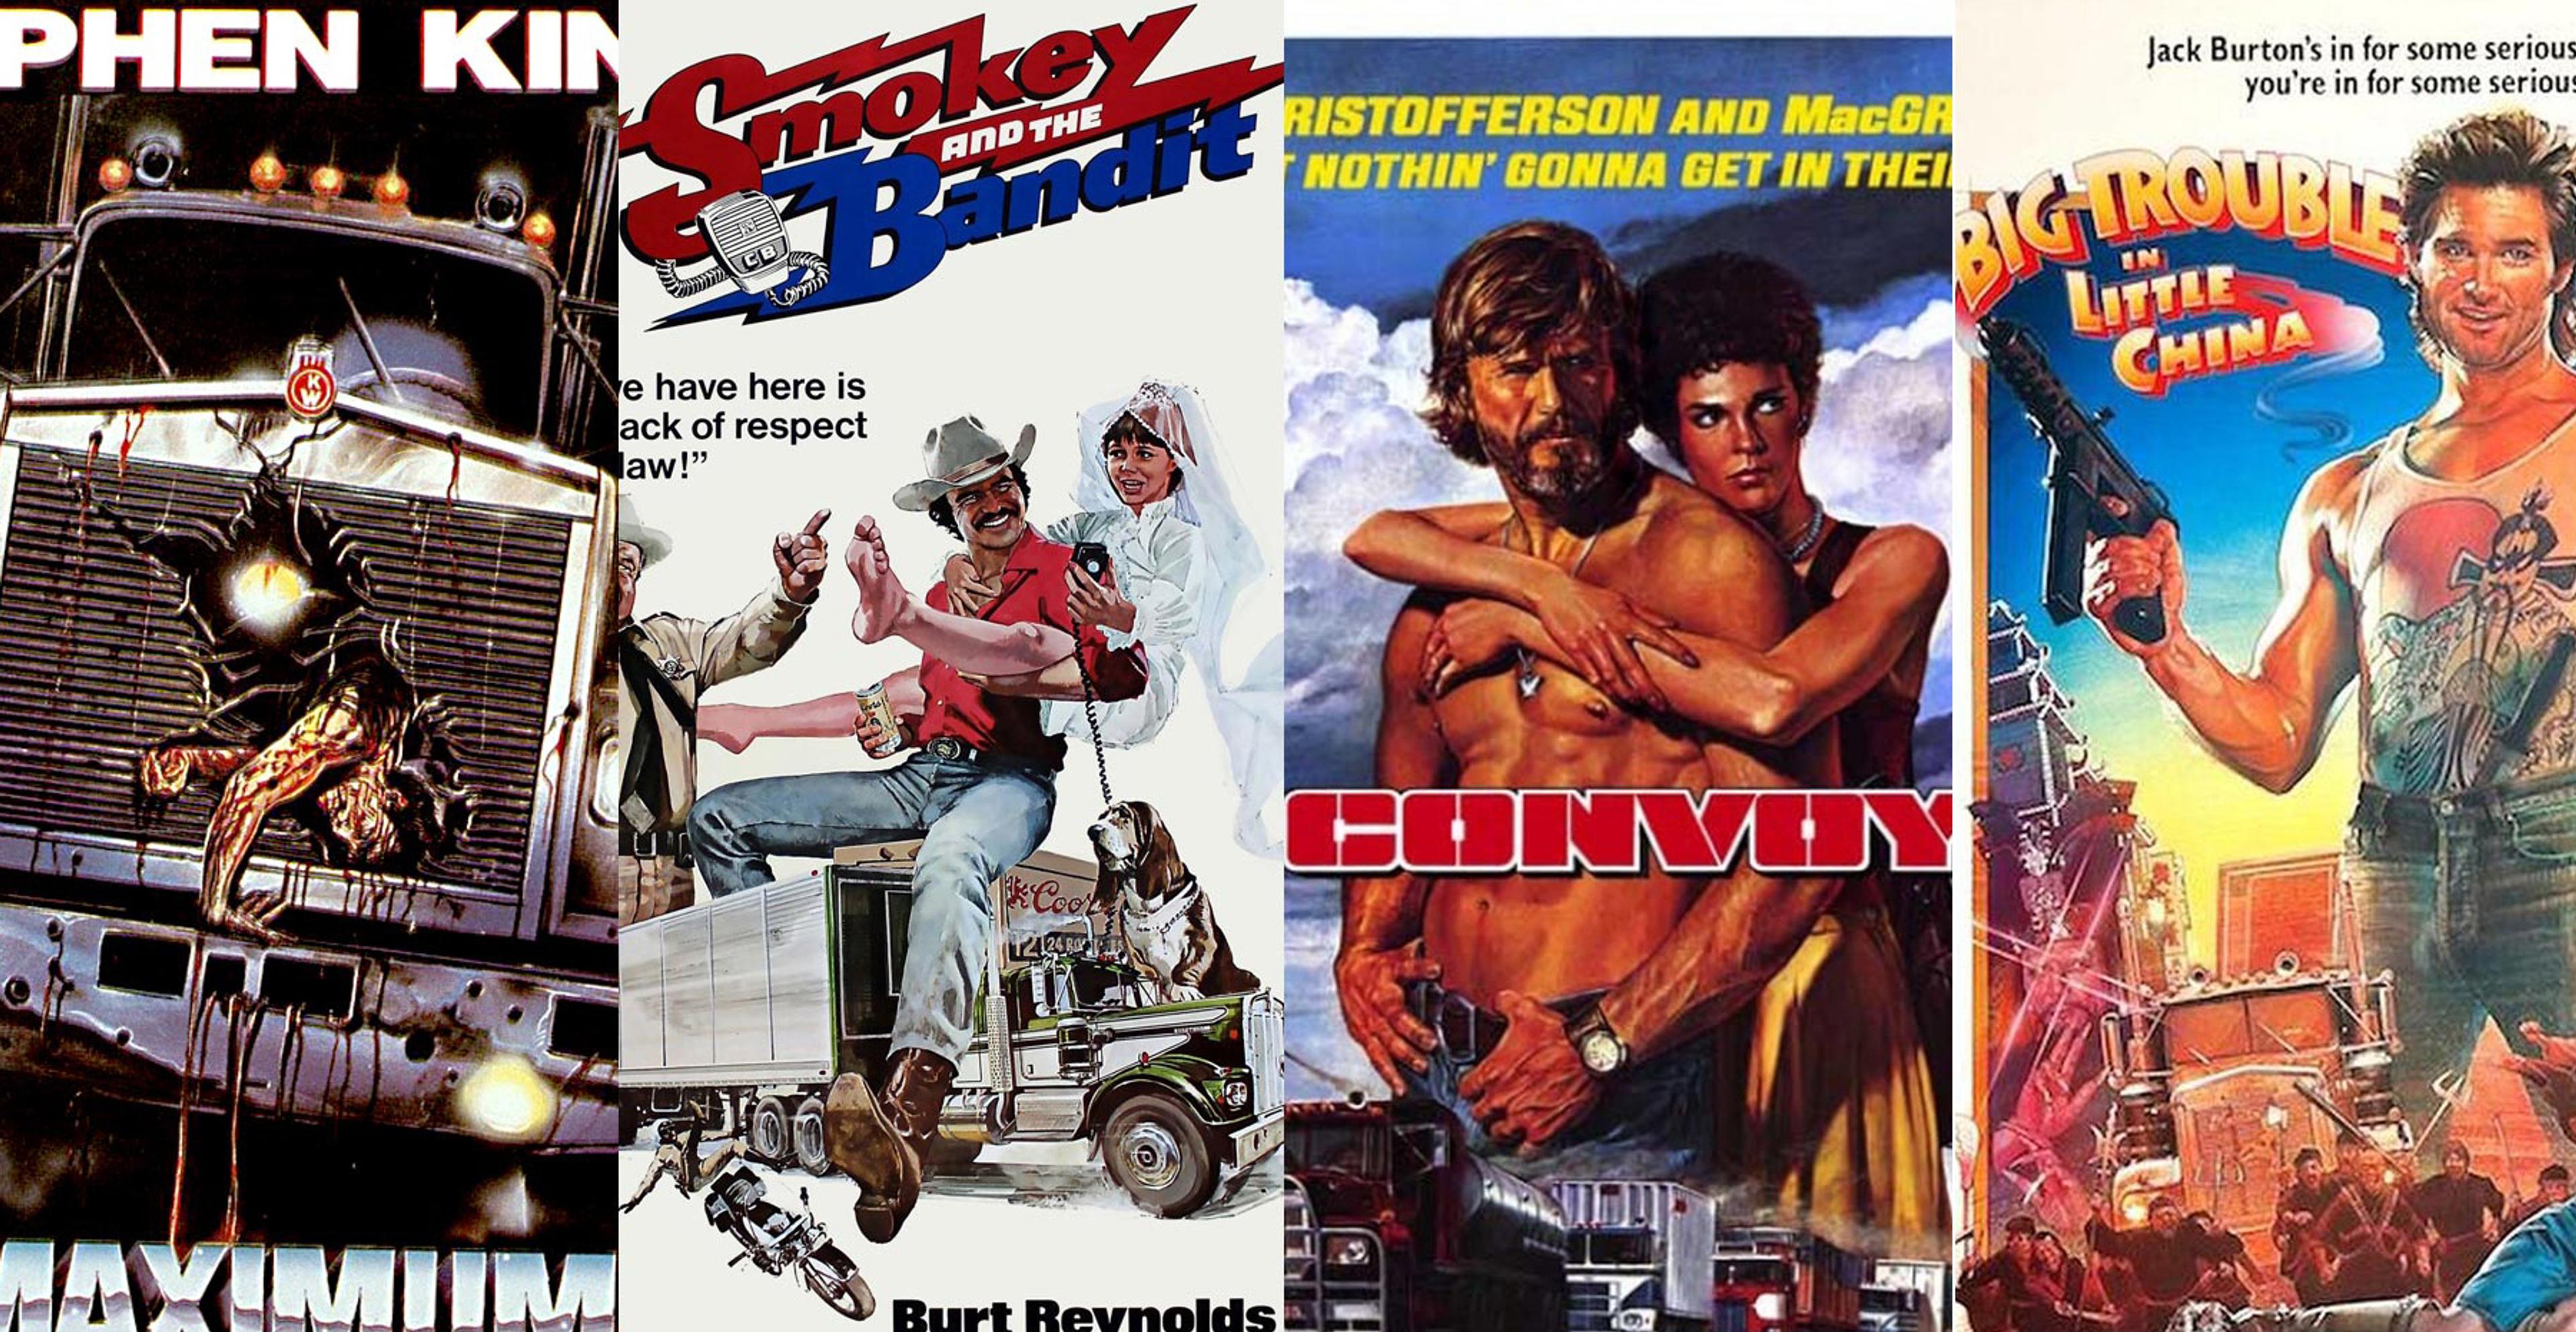 4 movie posted cropped together of Maximum Overdrive, Smokey and the Bandit, Convoy and Big Trouble in Little China.